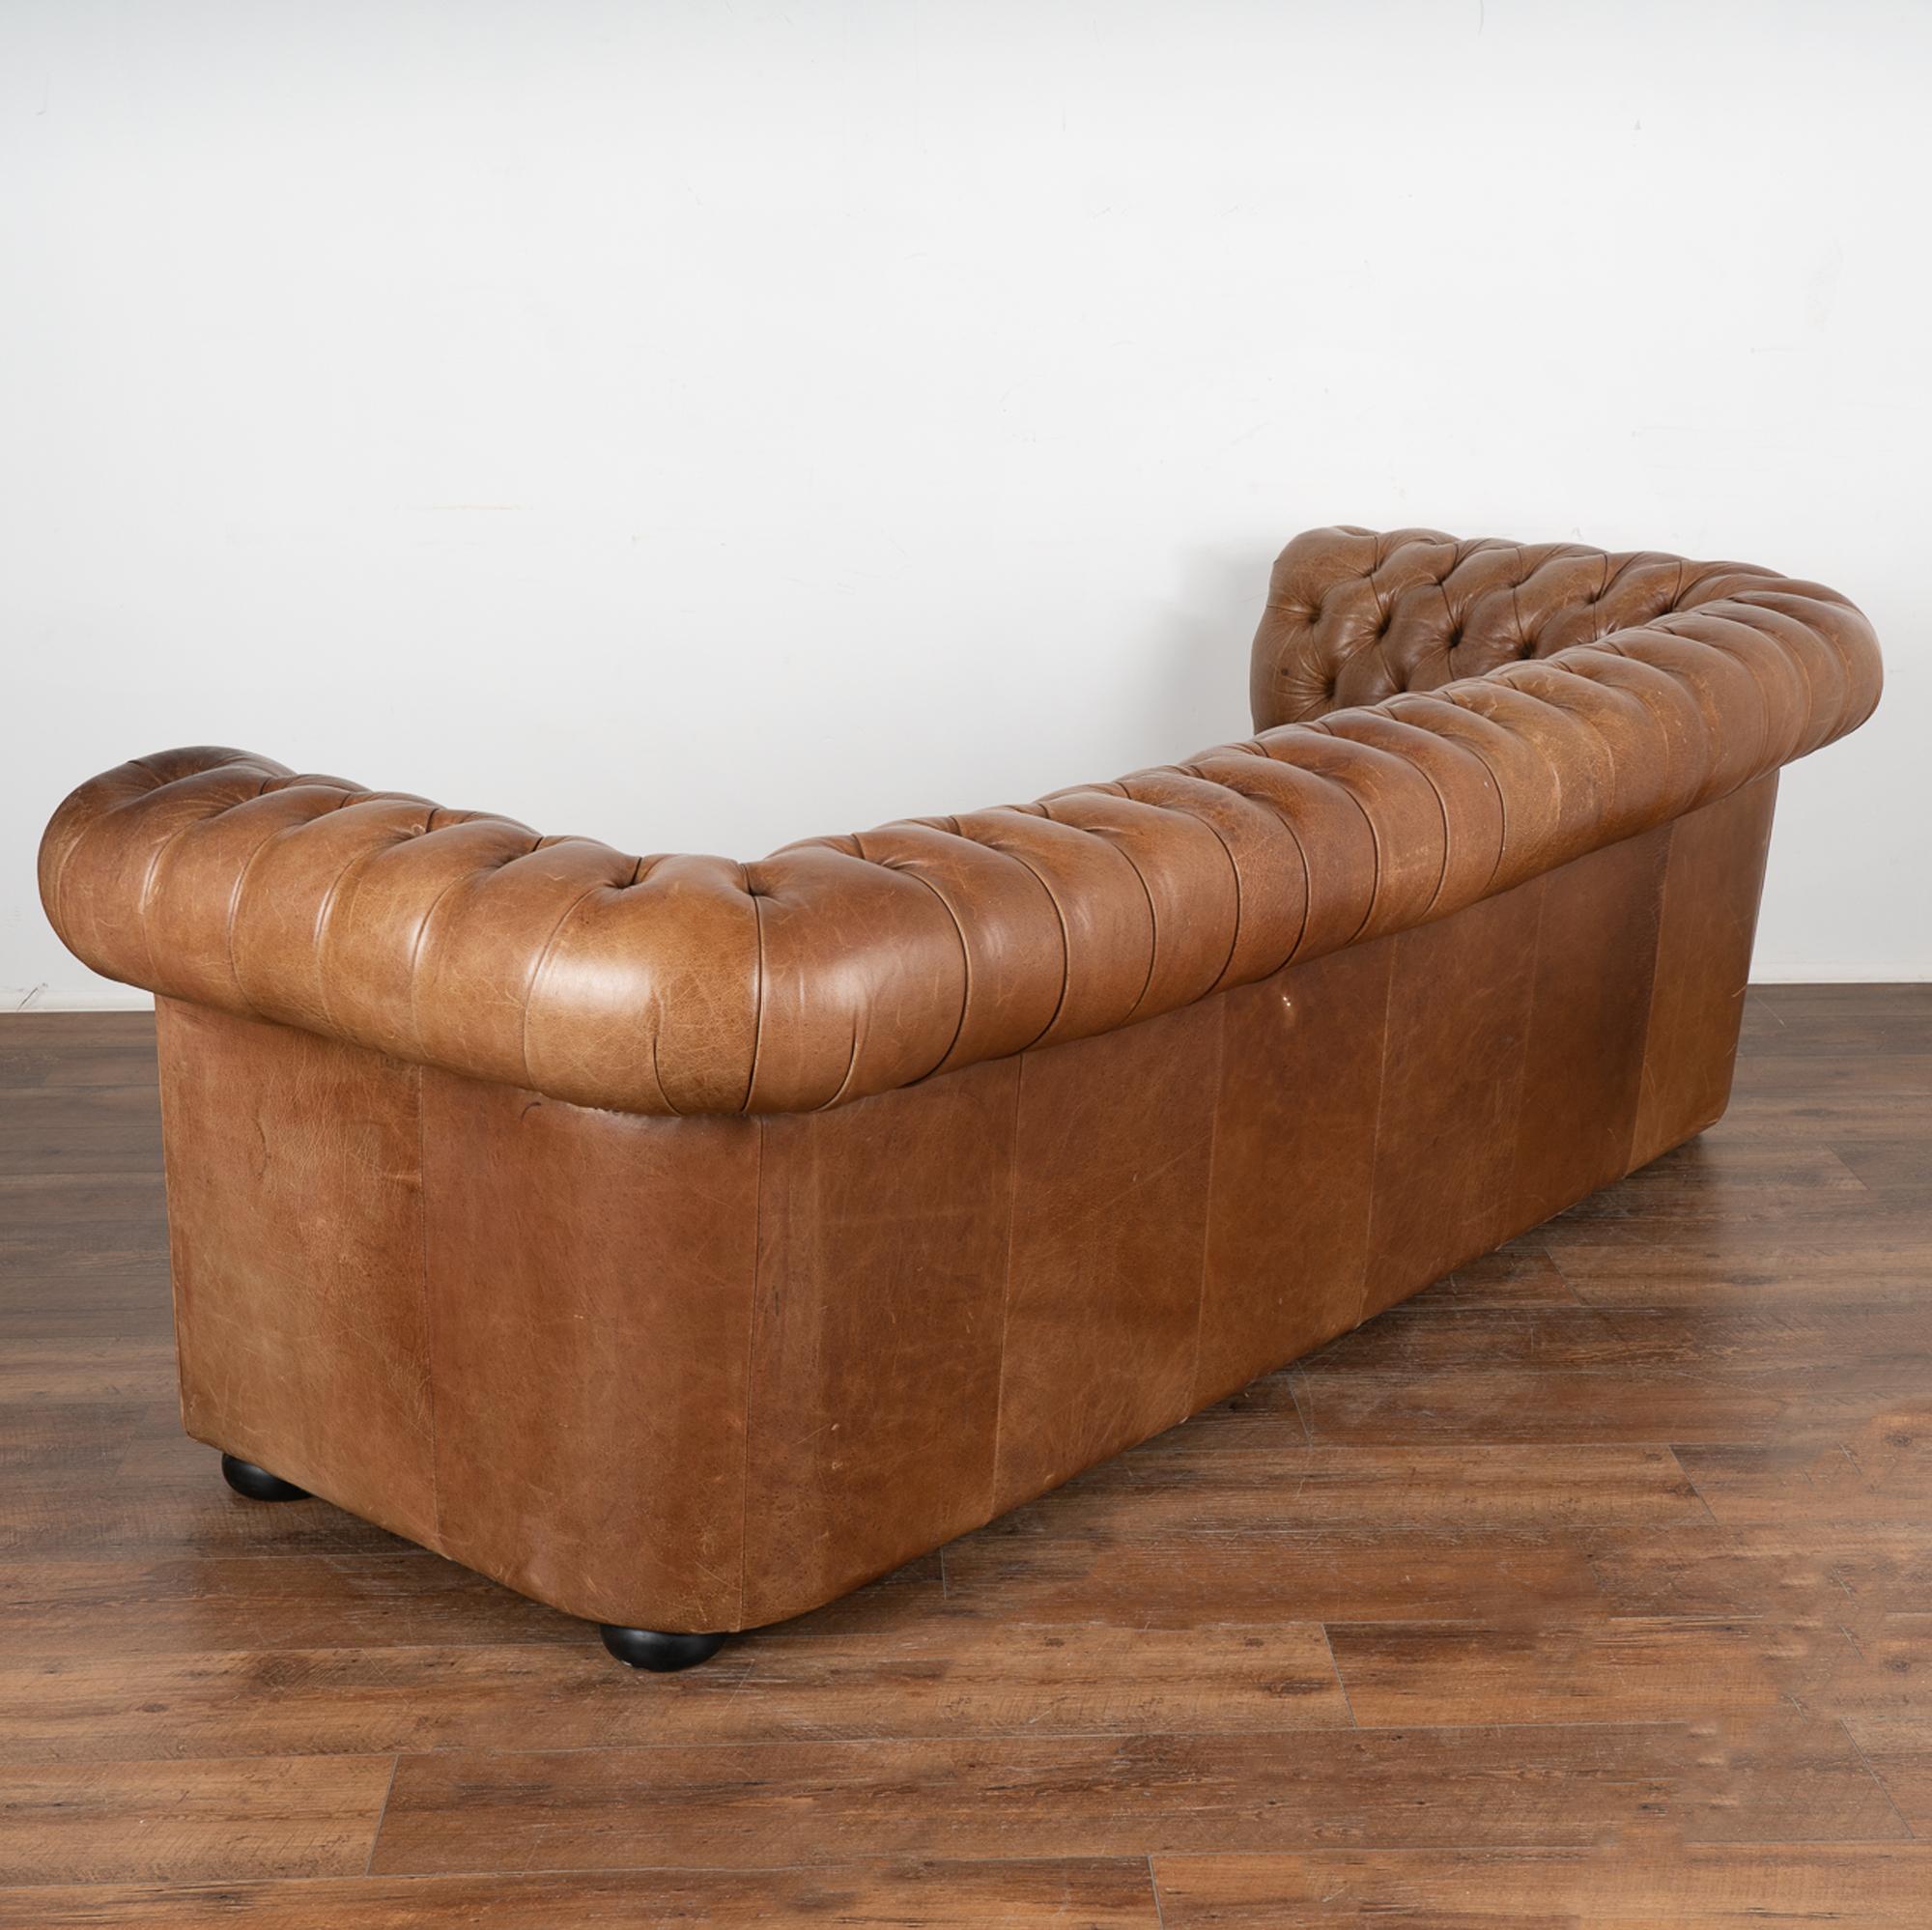 Vintage Brown Leather Three Seat Chesterfield Sofa, Denmark circa 1960-70 For Sale 6